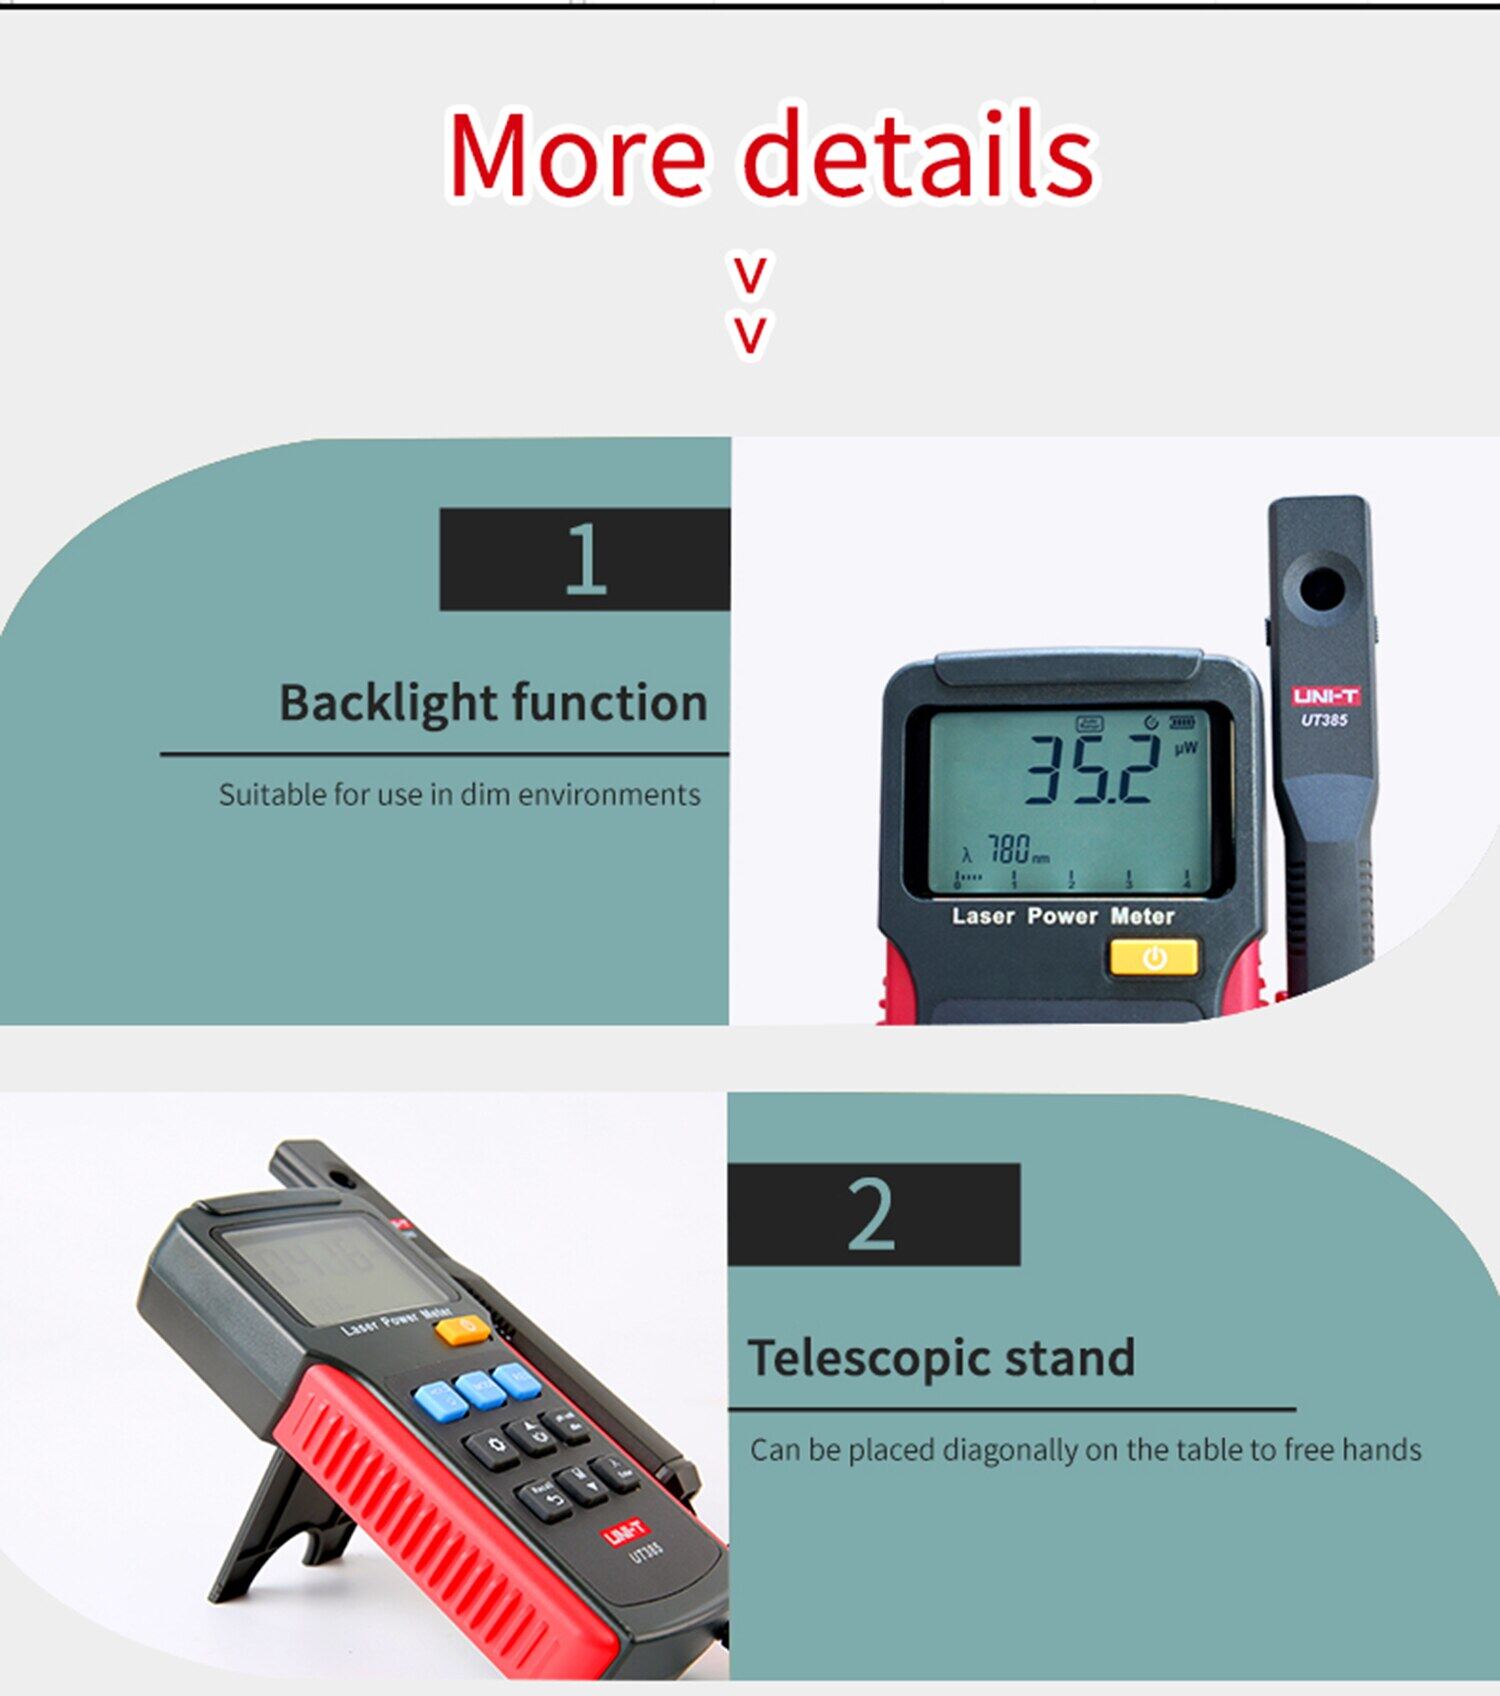 Details about   UNI-T UT385 Laser Power Meter LCD Screen Wired Handheld 